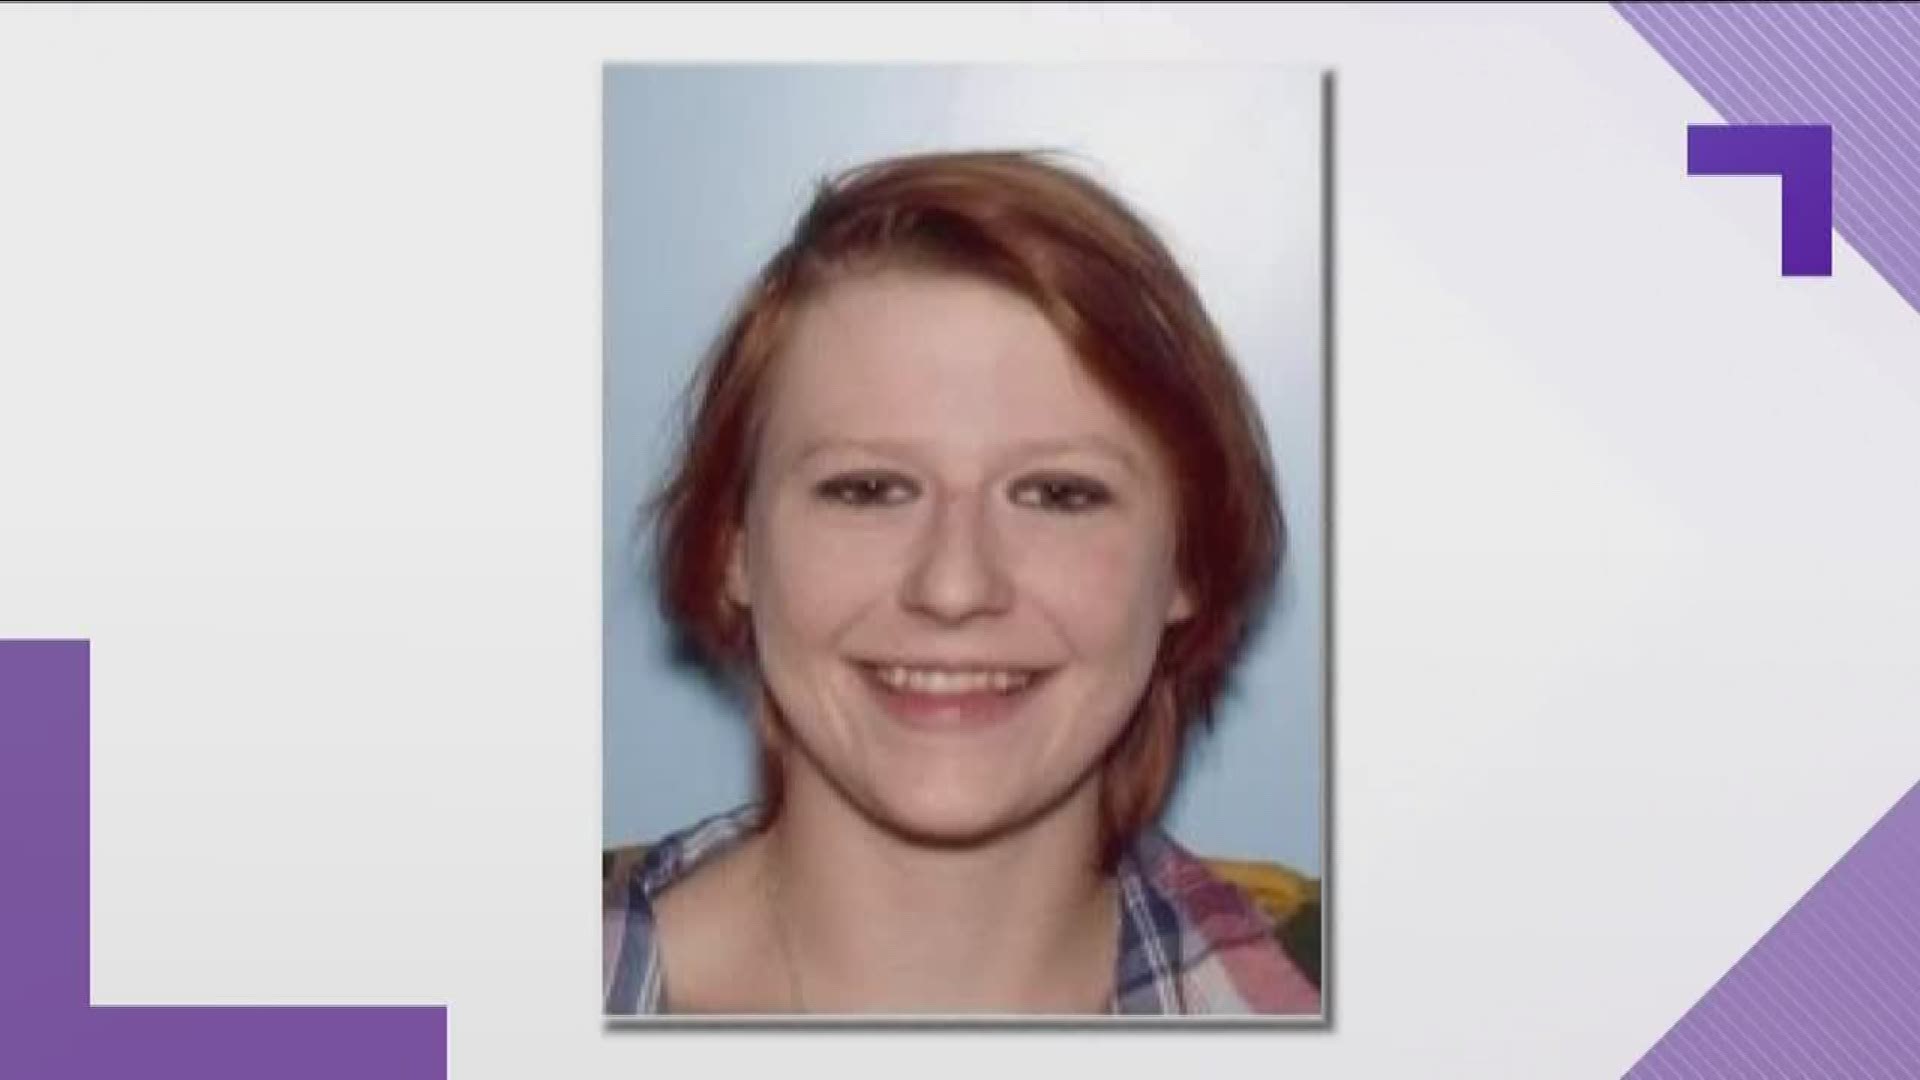 Investigators have found a body they believe is 21-year-old Hannah Bender in a shallow grave in Forsyth County.